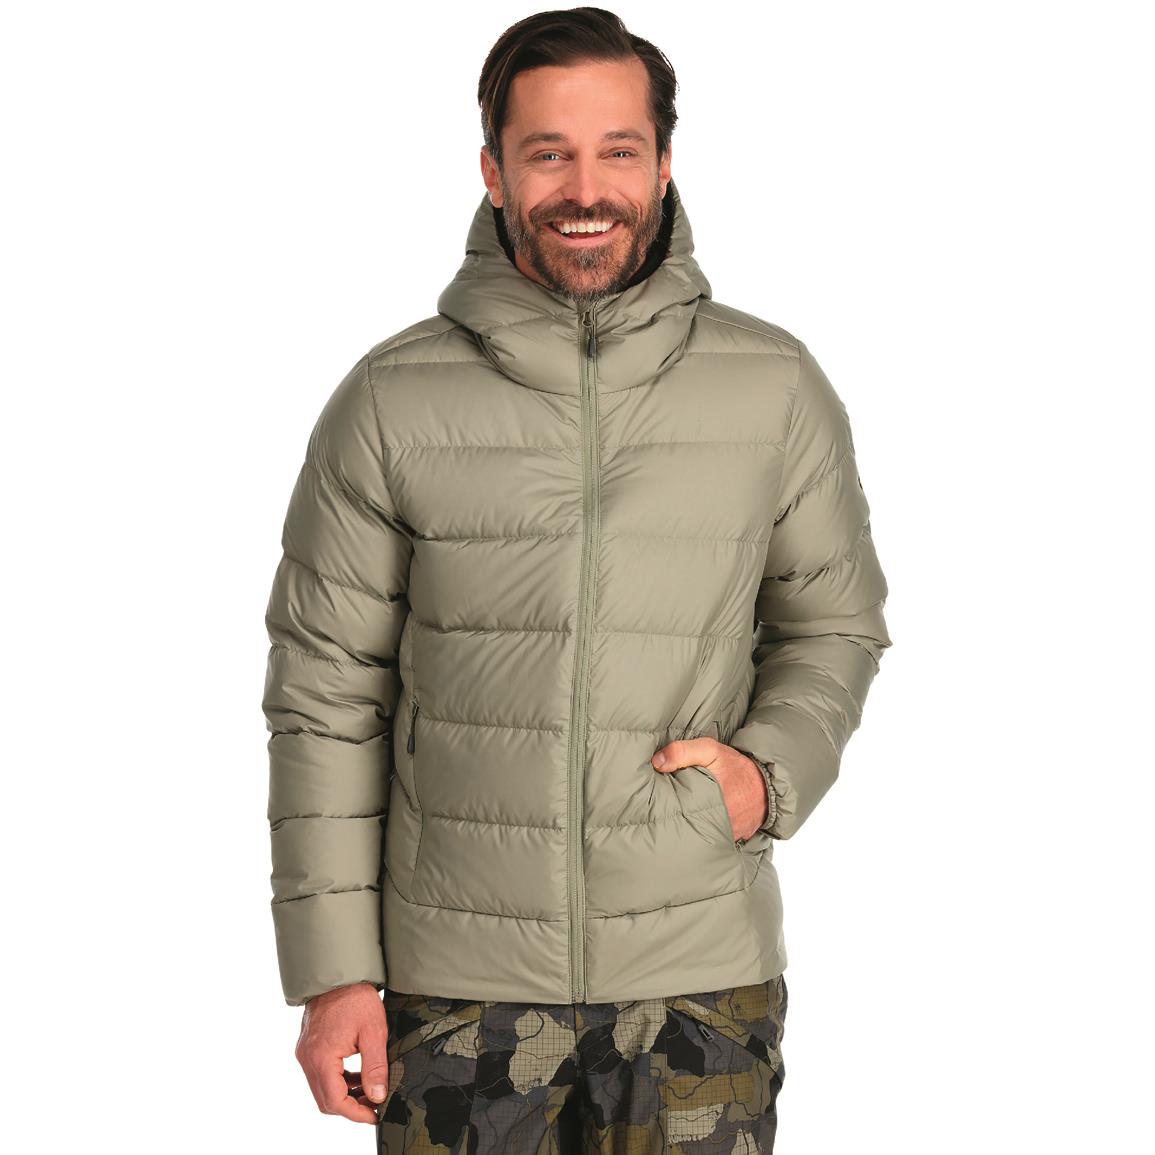 Outdoor Research Men's Coldfront Down Insulated Hooded Jacket, Flint